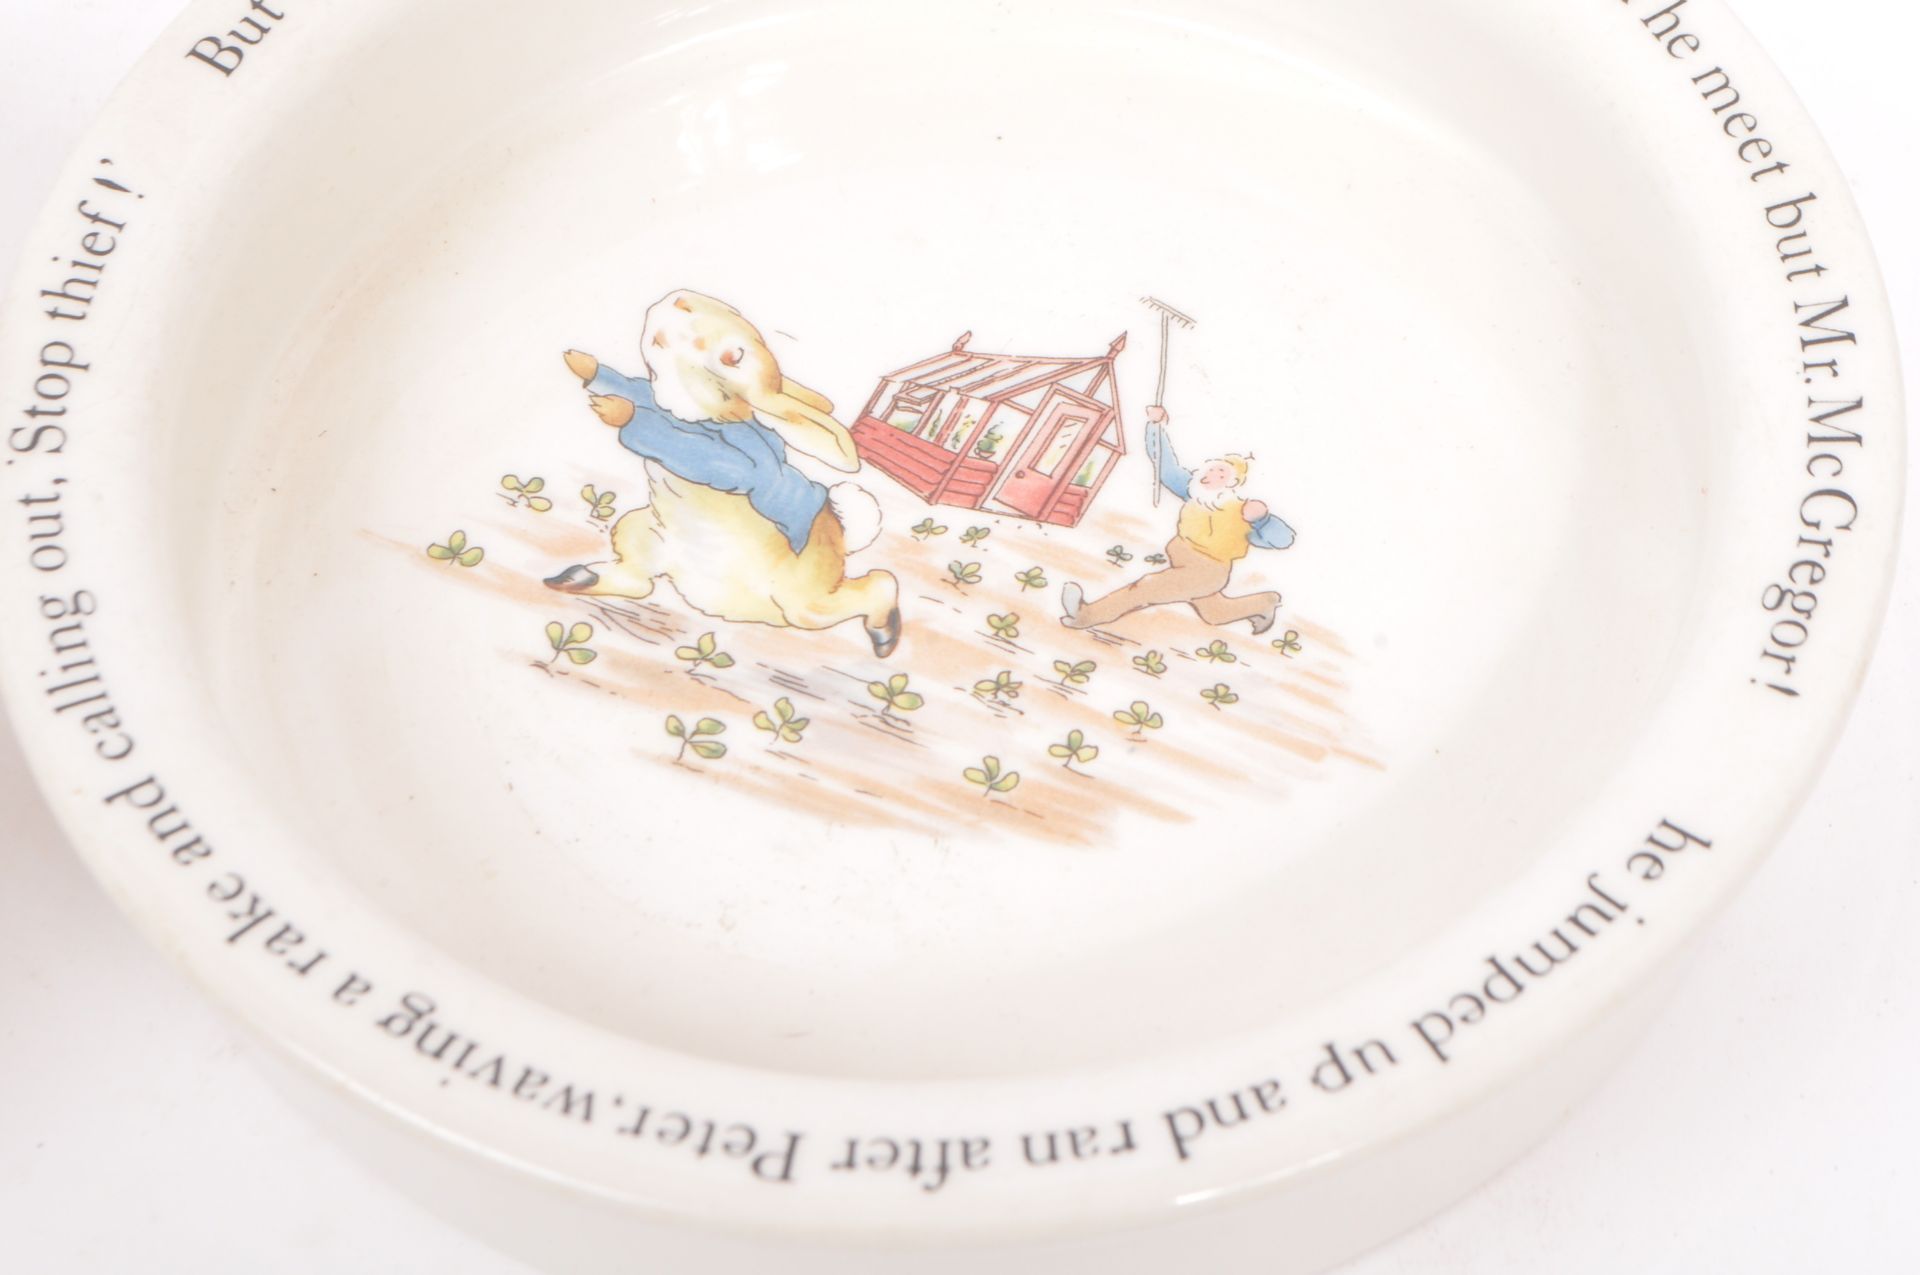 WEDGWOOD - COLLECTION OF PETER RABBIT CHINA PORCELAIN PLATES - Image 6 of 9